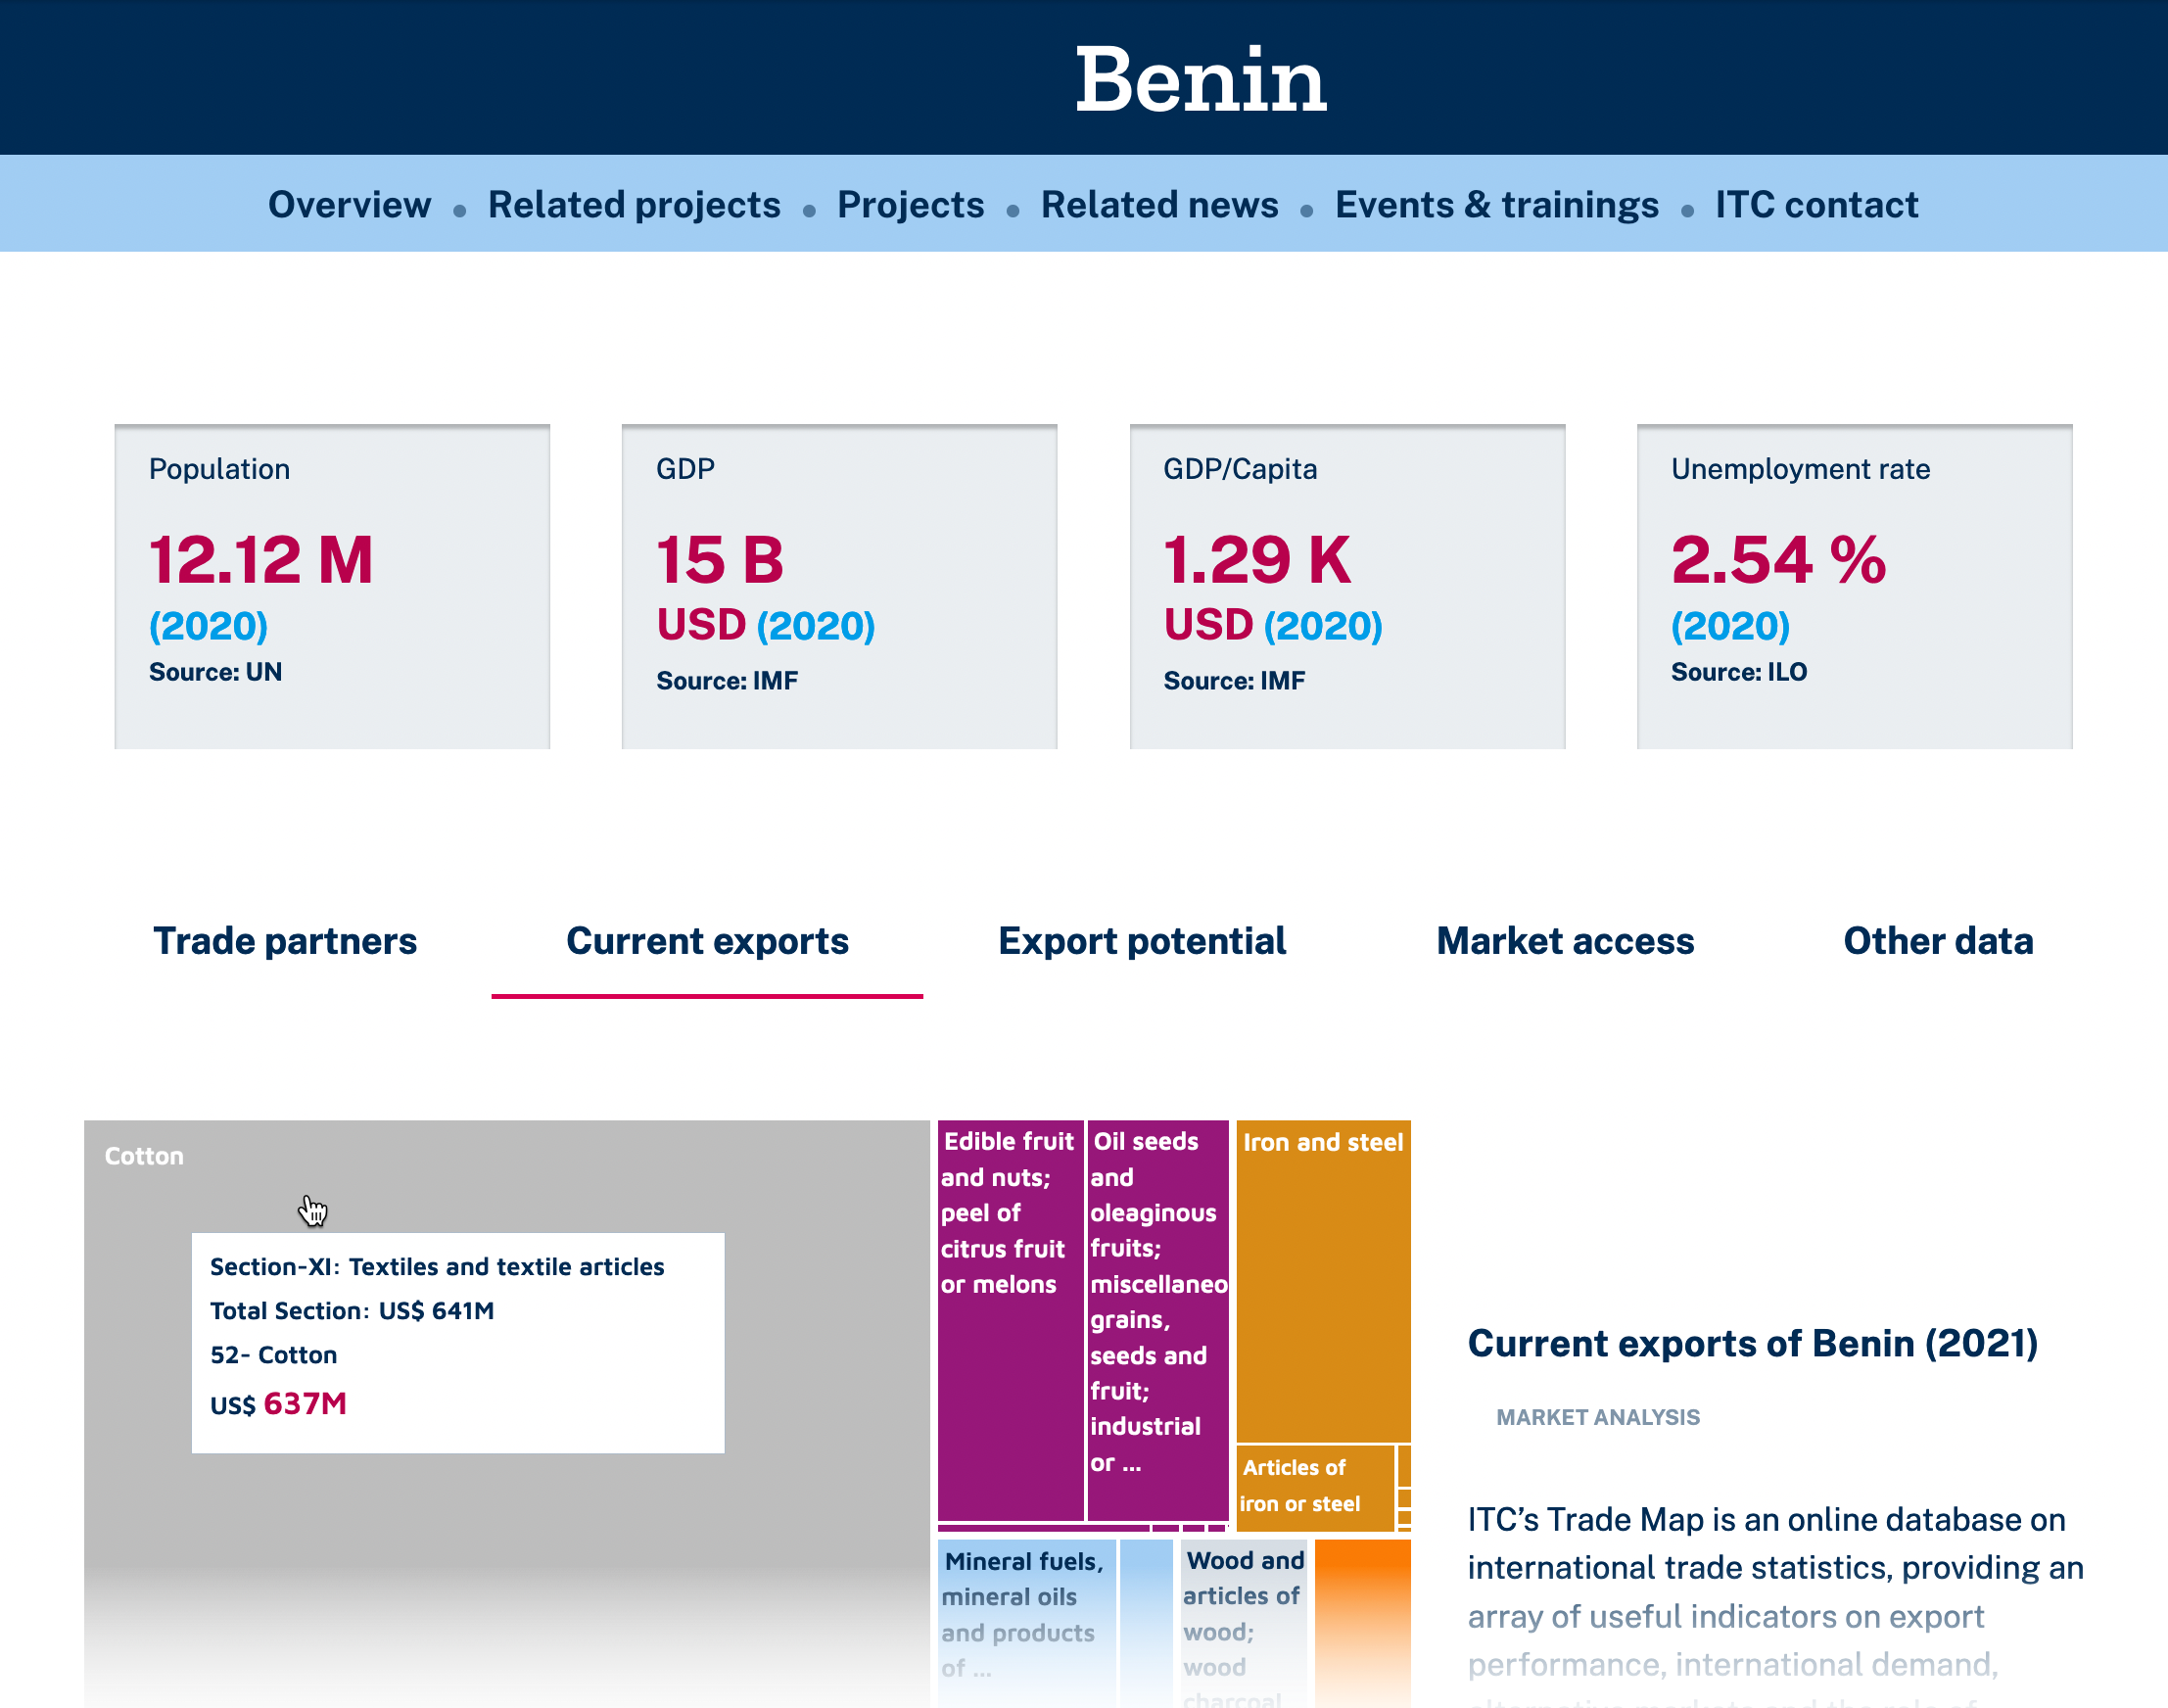 Benin trade data published by ITC/UN